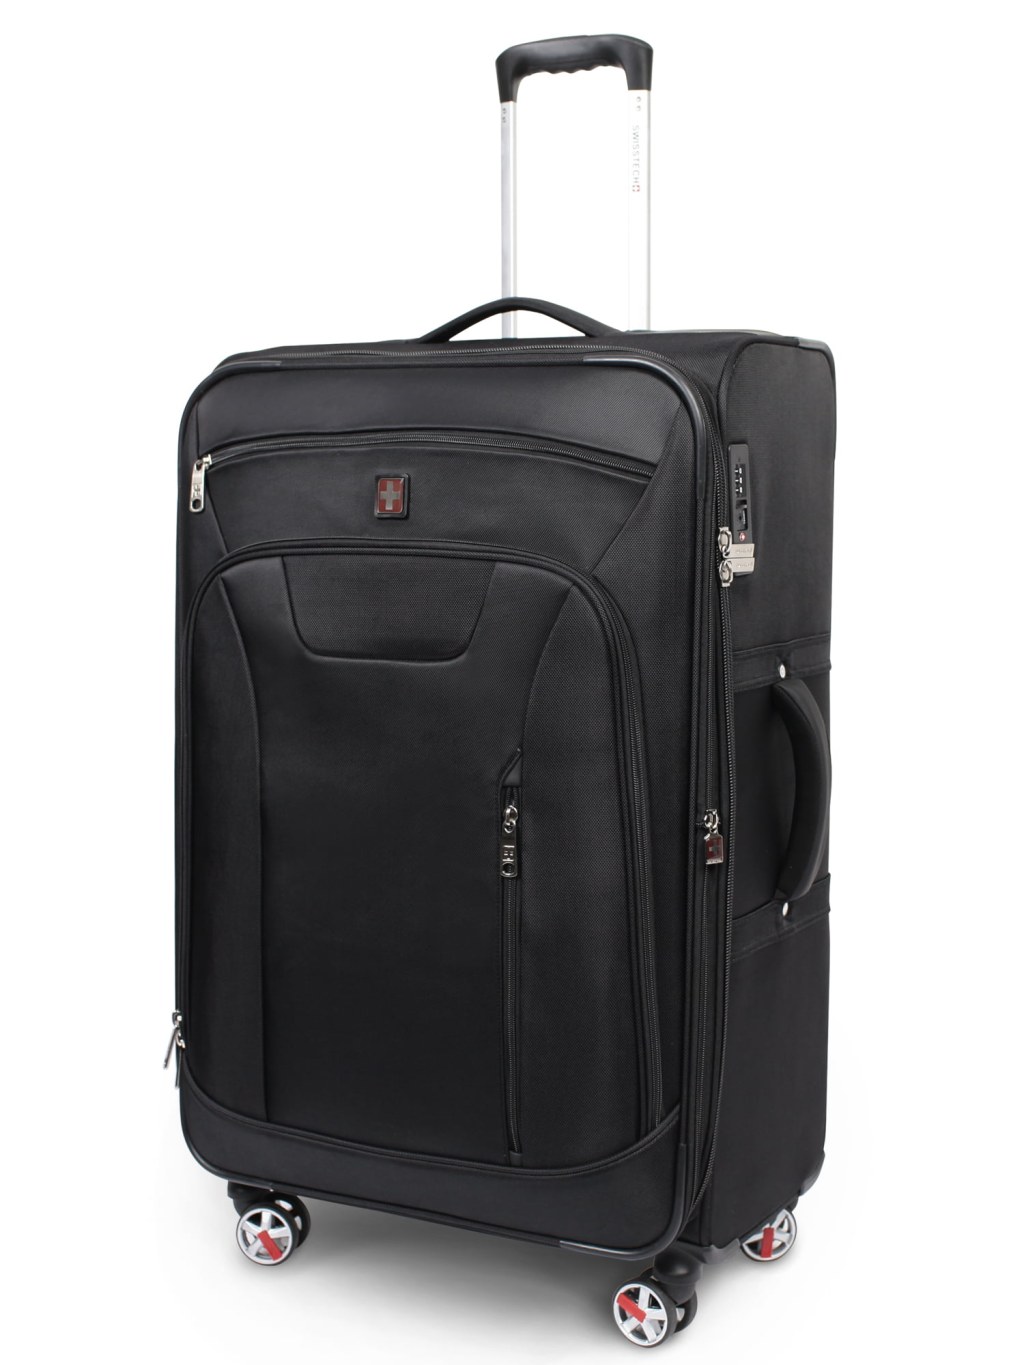 Picture of: Swiss Tech ” Softside Checked Luggage, Black – Walmart